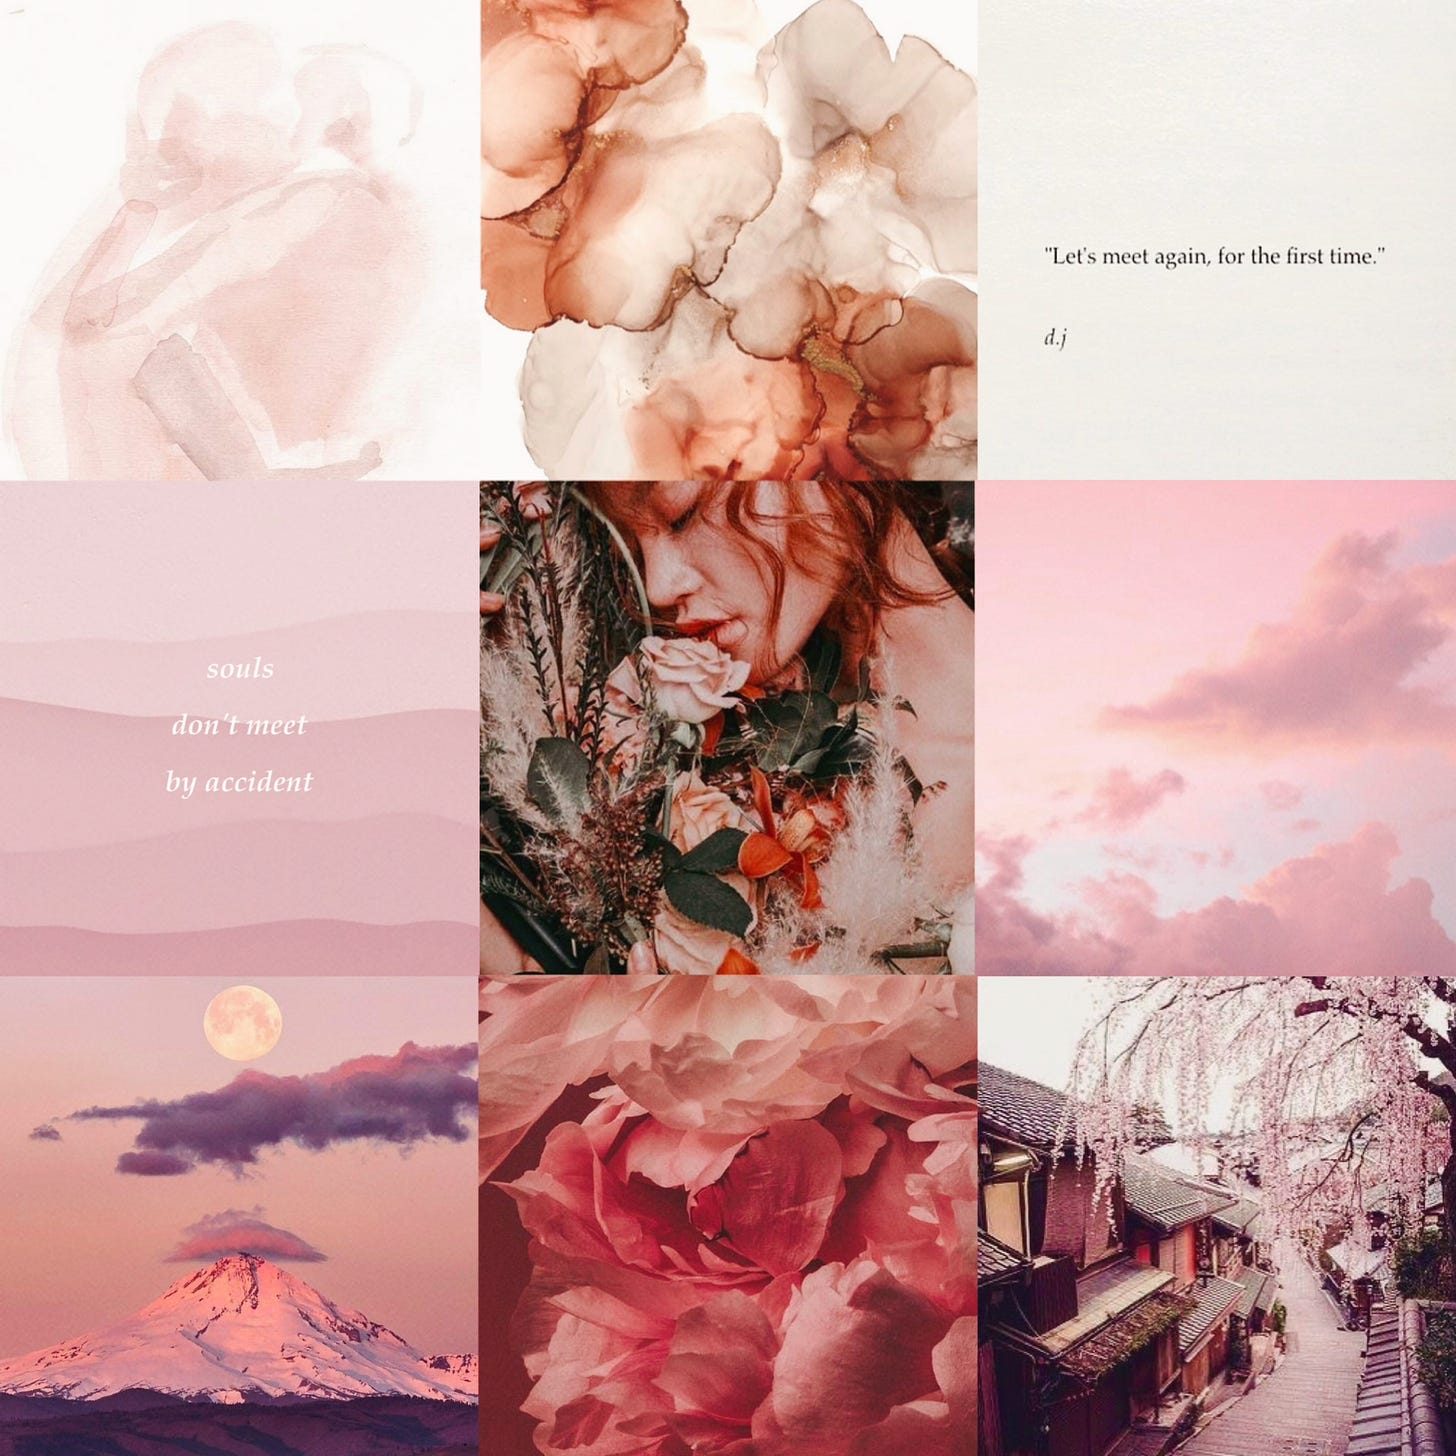 A 3*3 moodboard with pink and purple tones. From top left to bottom right: 	1.	Pink watercolor image of two figures embracing 	2.	Watercolor blotches forming flower-like shapes 	3.	“Let’s meet again, for the first time.”—d.j in black words on white 	4.	Pink ombré background with “souls don’t meet by accident” in white words 	5.	A girl with eyes closed kissing a rose 	6.	Pink clouds 	7.	Fuji mountain tinged pink from the sky, with purple clouds and a full moon above 	8.	Closeup of pink peonies 	9.	A Japanese street overhung with cherry blossoms